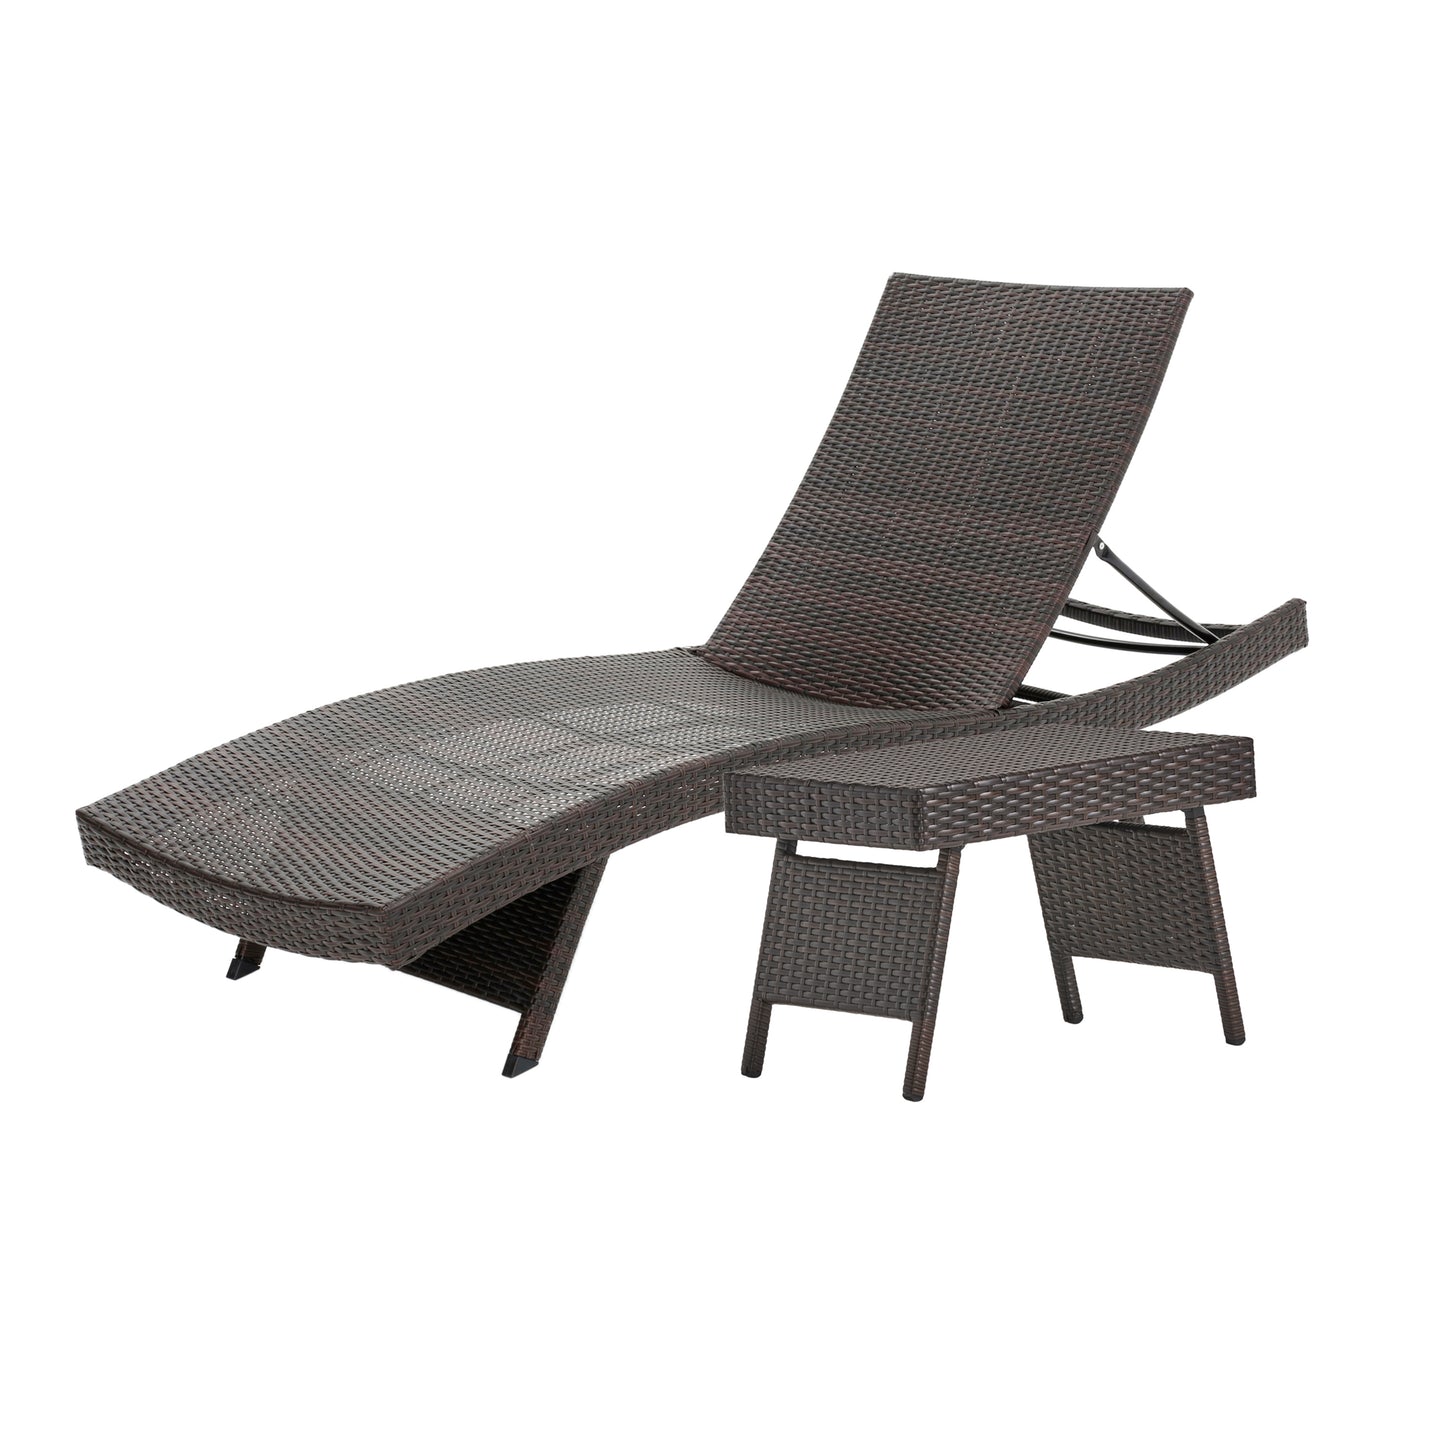 Lakeport Outdoor Wicker Lounge and Table